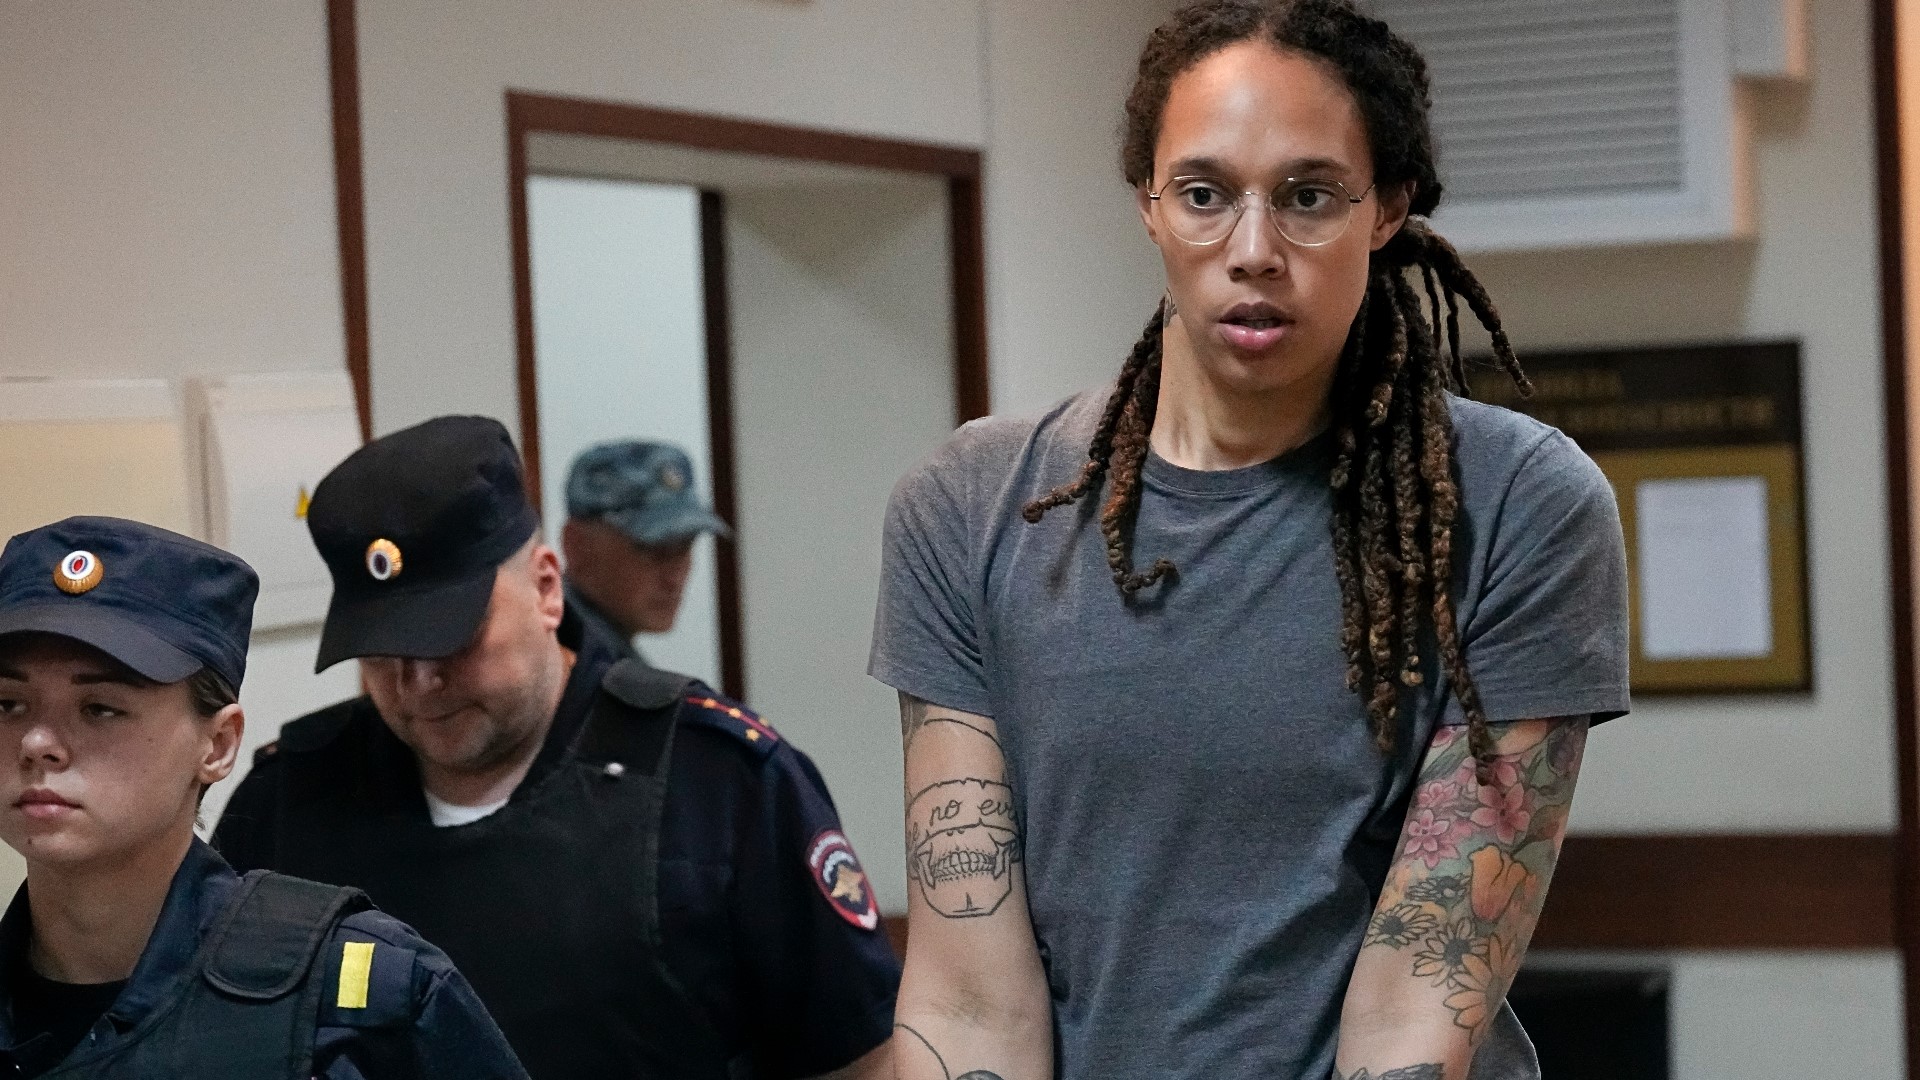 WNBA star Brittney Griner is free following a prisoner swap for Russian arms dealer Viktor Bout